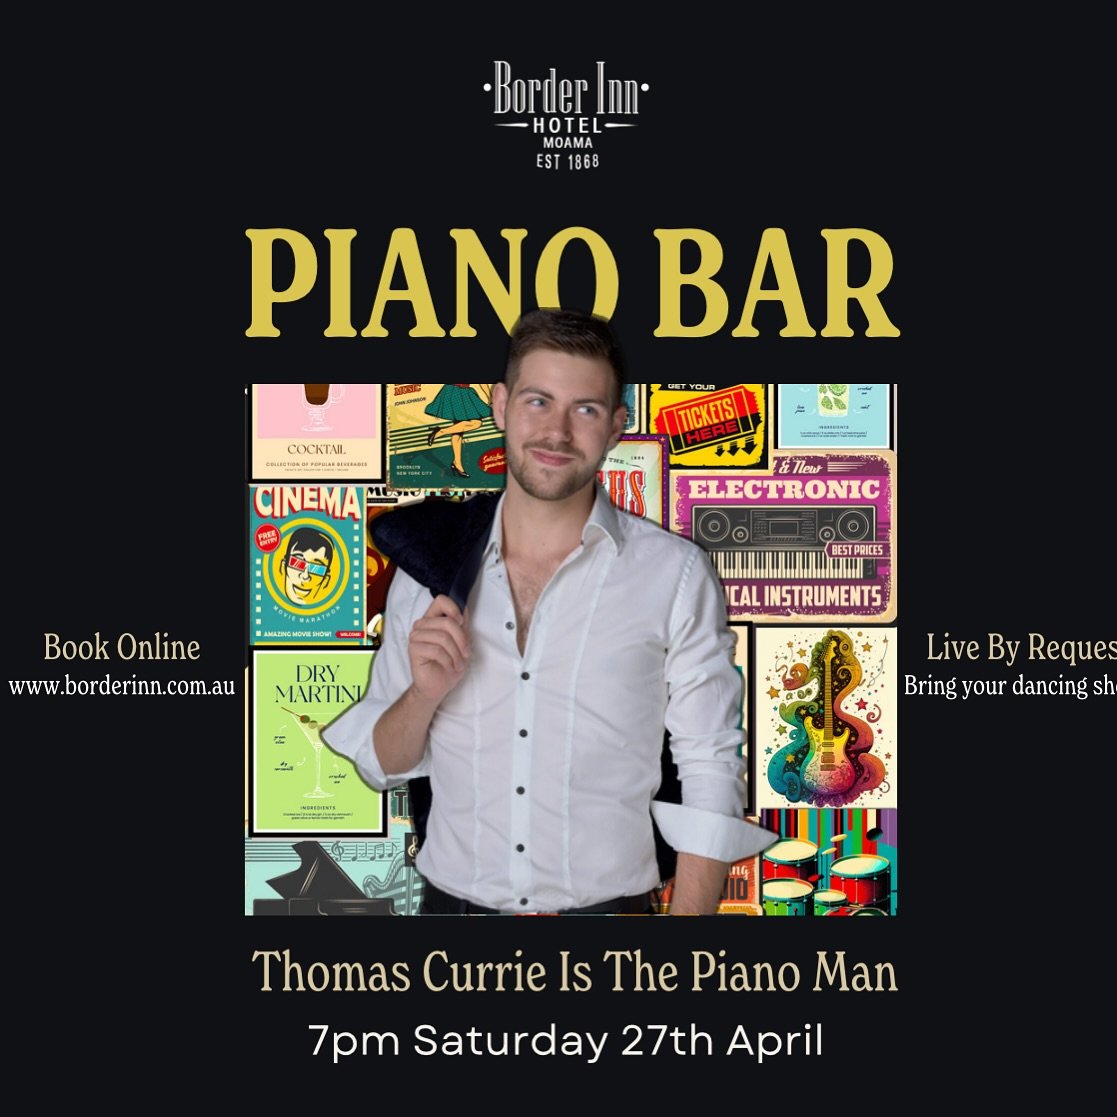 Saturday Night! 🎶 
Get ready for some wholesome fun with @pianobargeelong at The Border Inn Hotel!

🎤Request a song and help @thomas_a_currie belt it out over the piano!

Grab your tickets at www.borderinnhotel.com.au 

#borderinnhotel #moama #moam